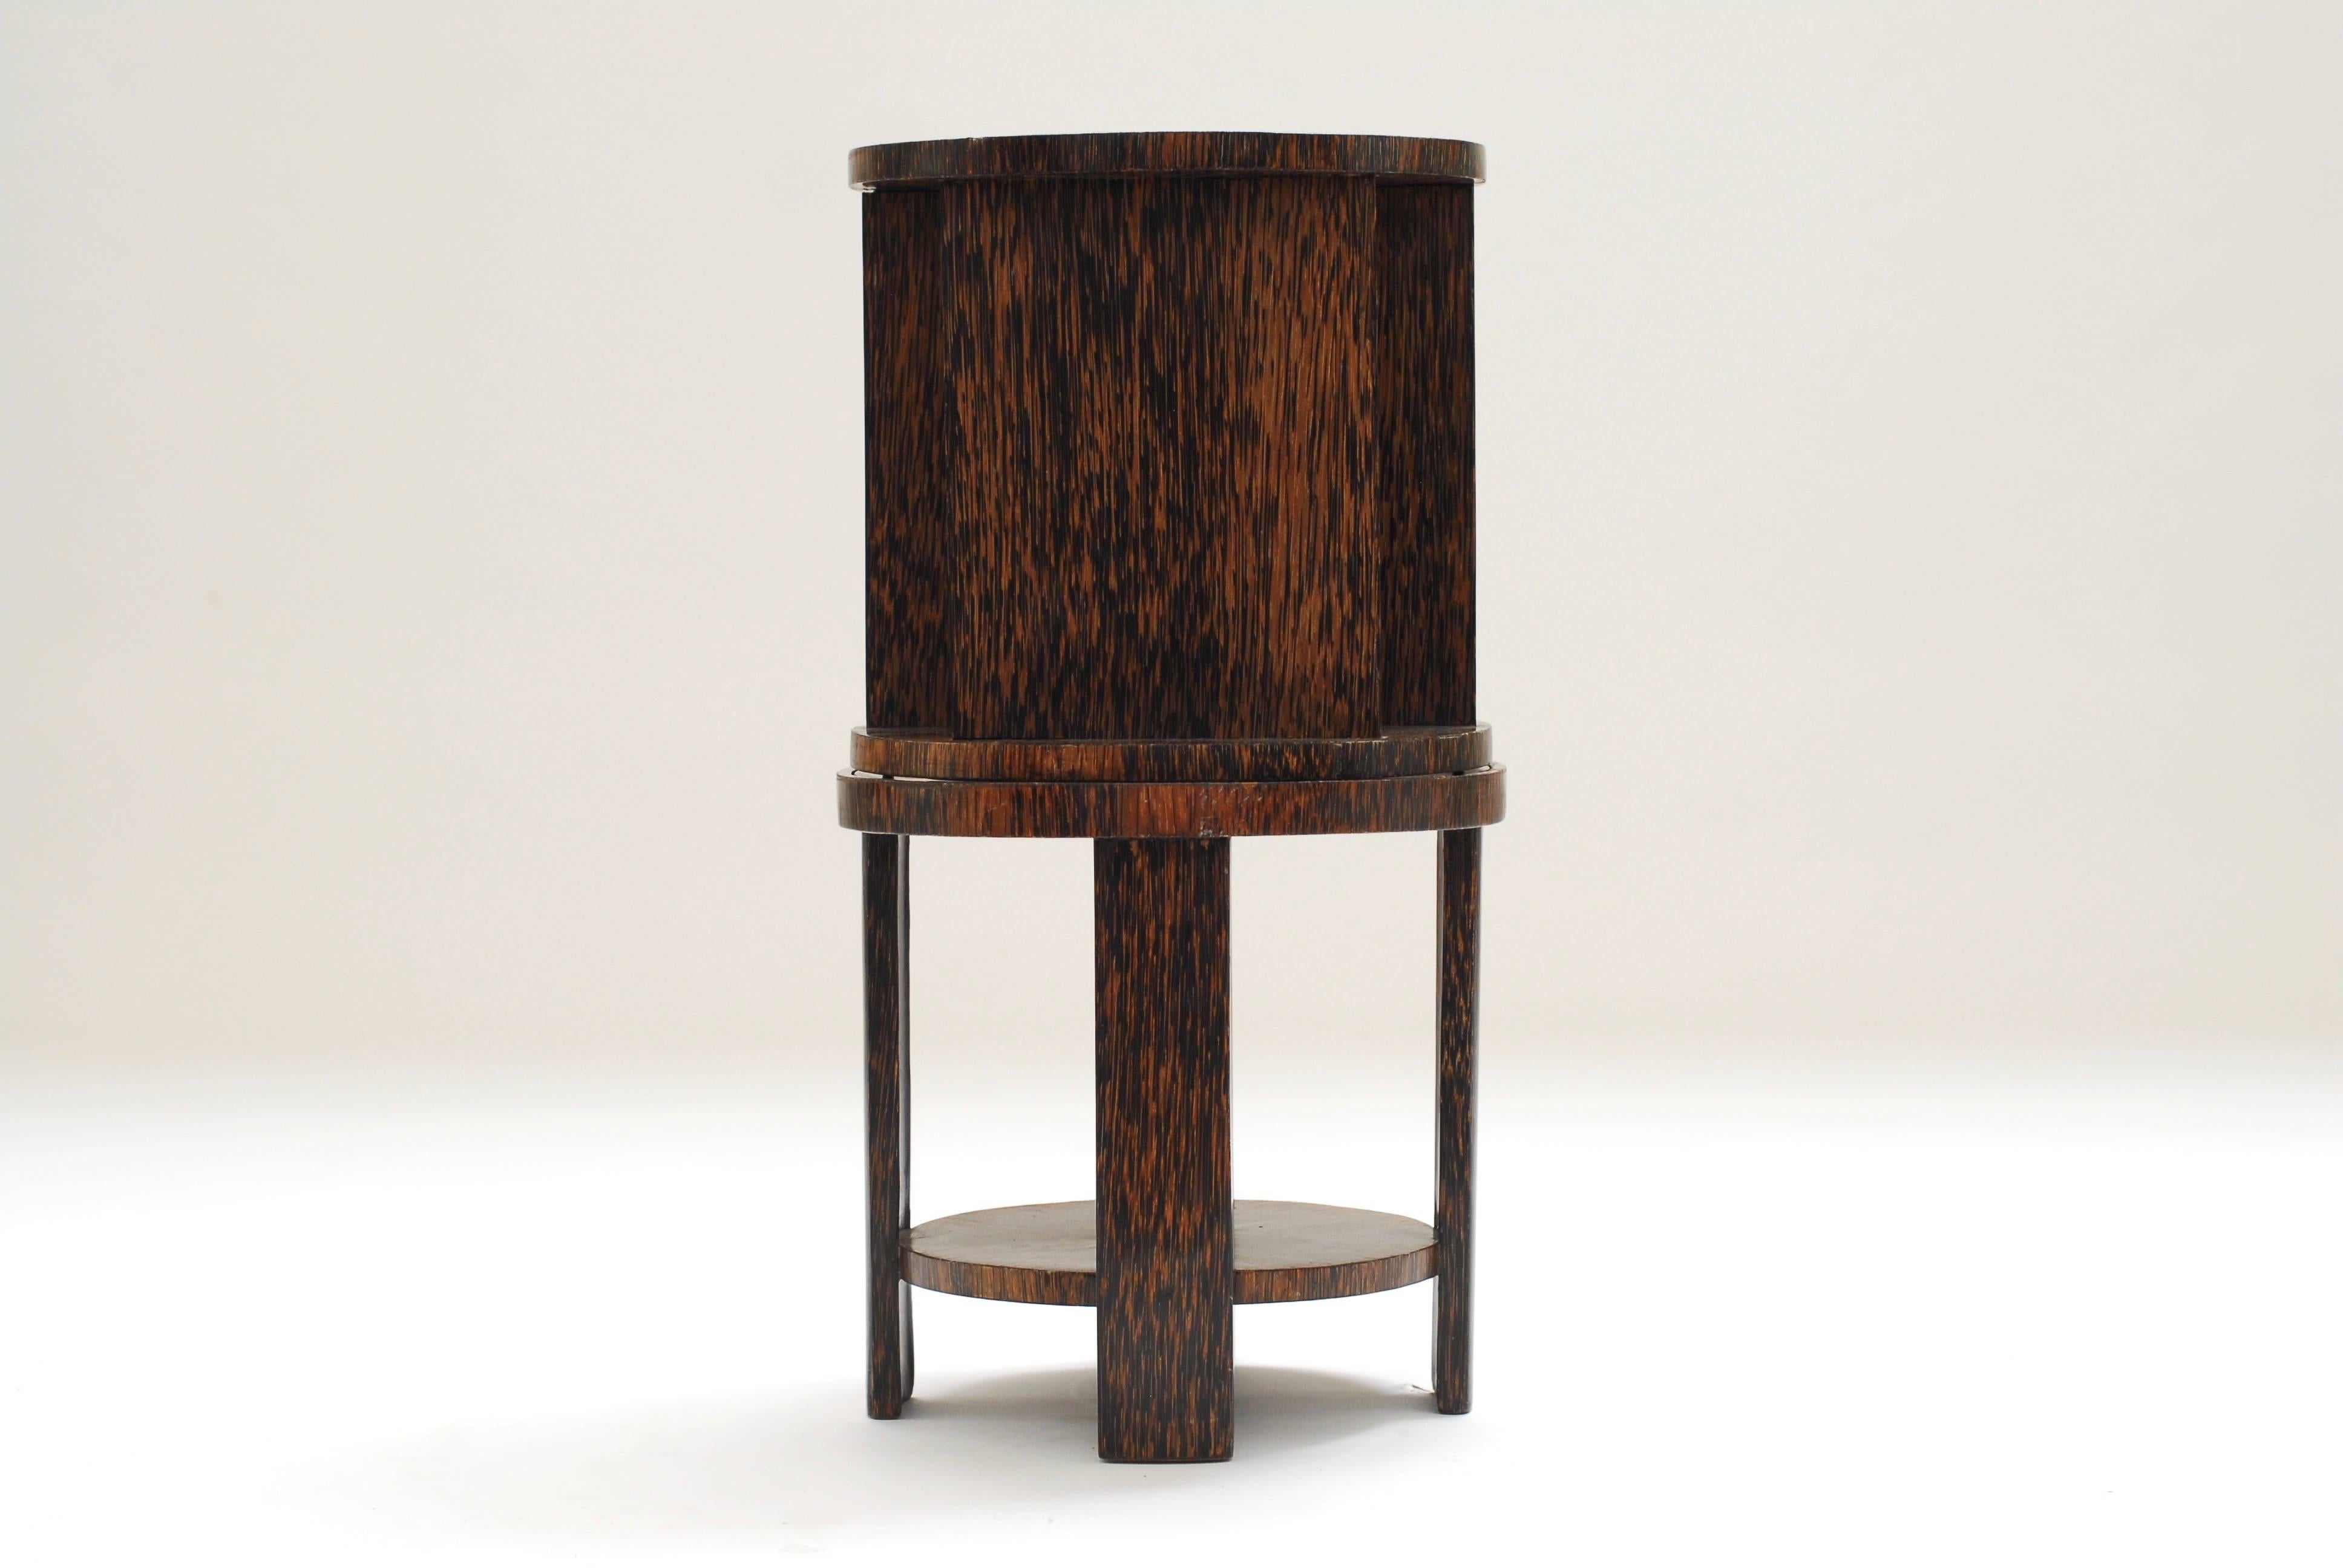 A well-proportioned and clean designed palm wood gueridon. Existing out of two pieces that inter-connect with a brass pin. The rotating finds place due to four small metal balls rolling on an integrated brass/bronze ring.
At the end of one leg